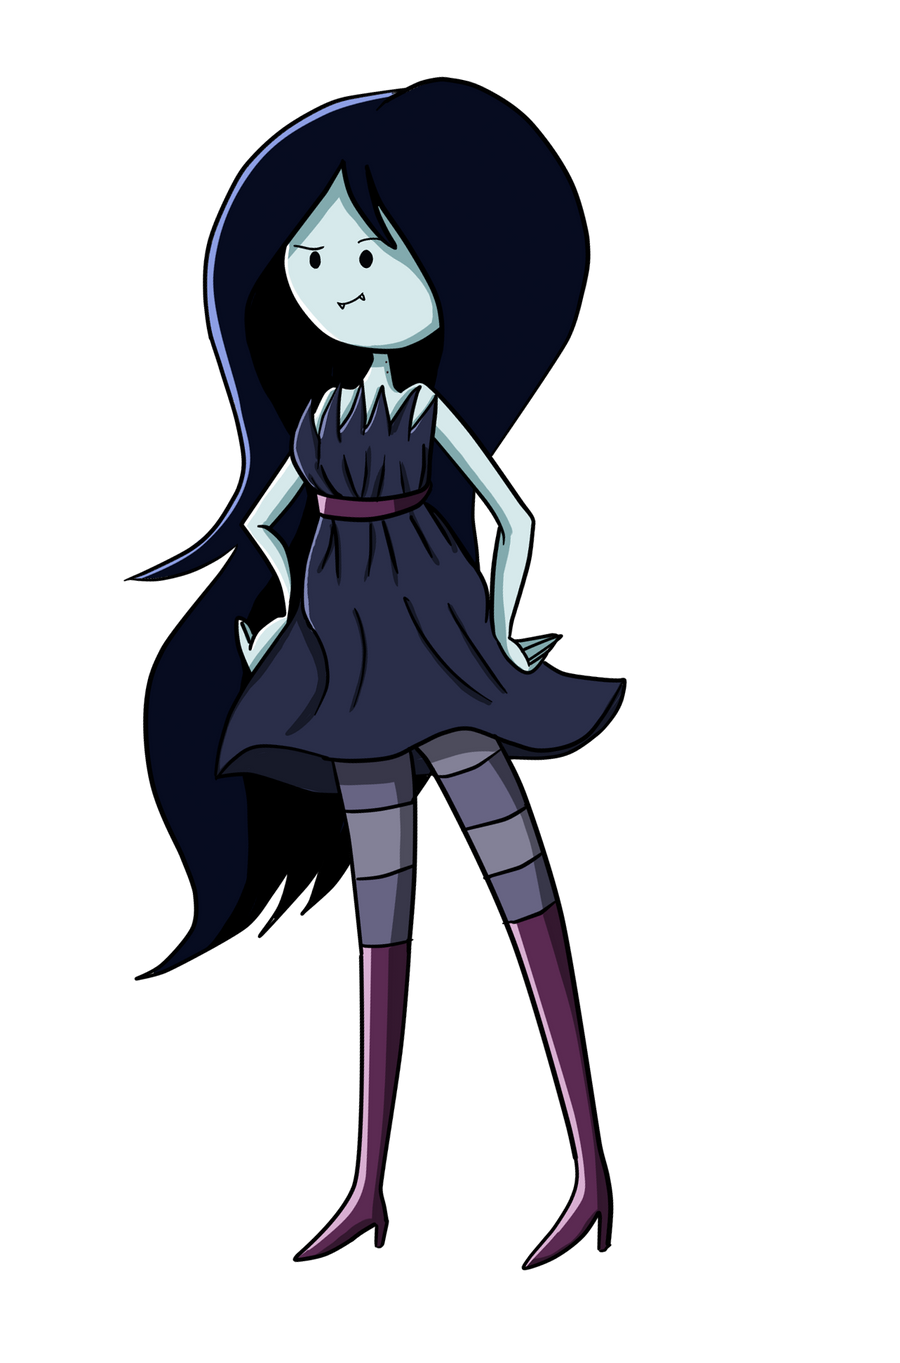 marceline_by_maryhina-d4j6lpy.png